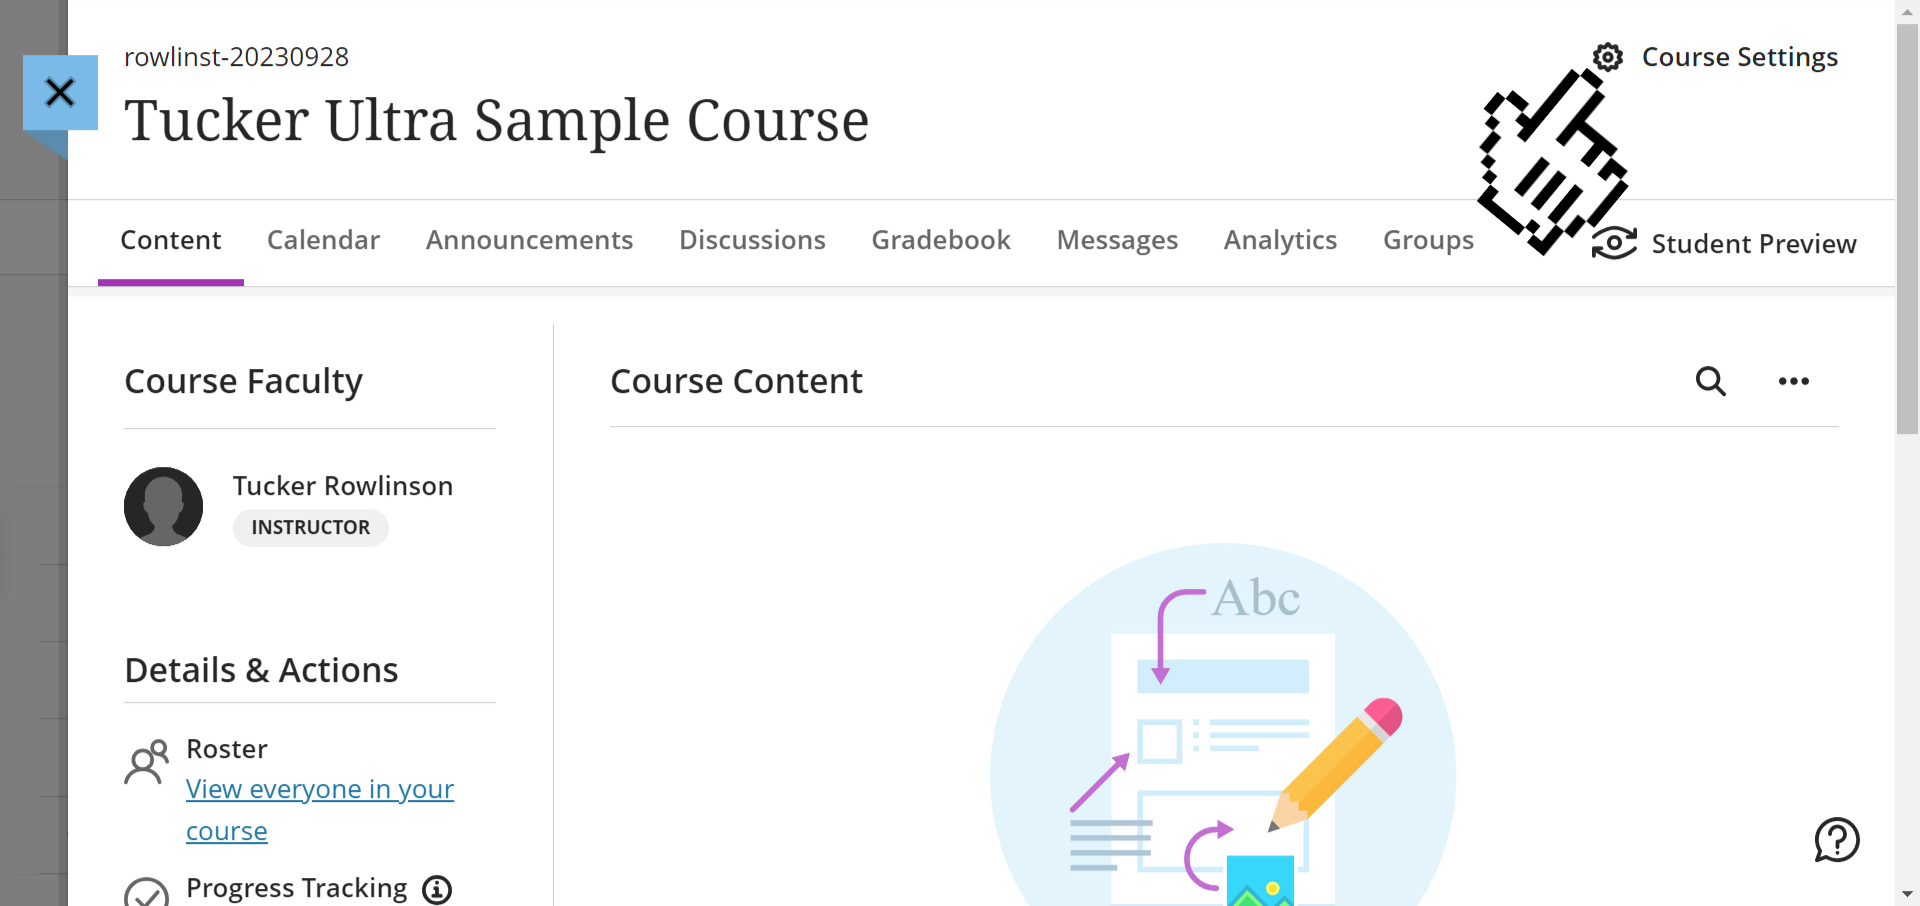 A screenshot of a Blackboard Ultra course, with a cursor icon pointing towards the Course Settings button